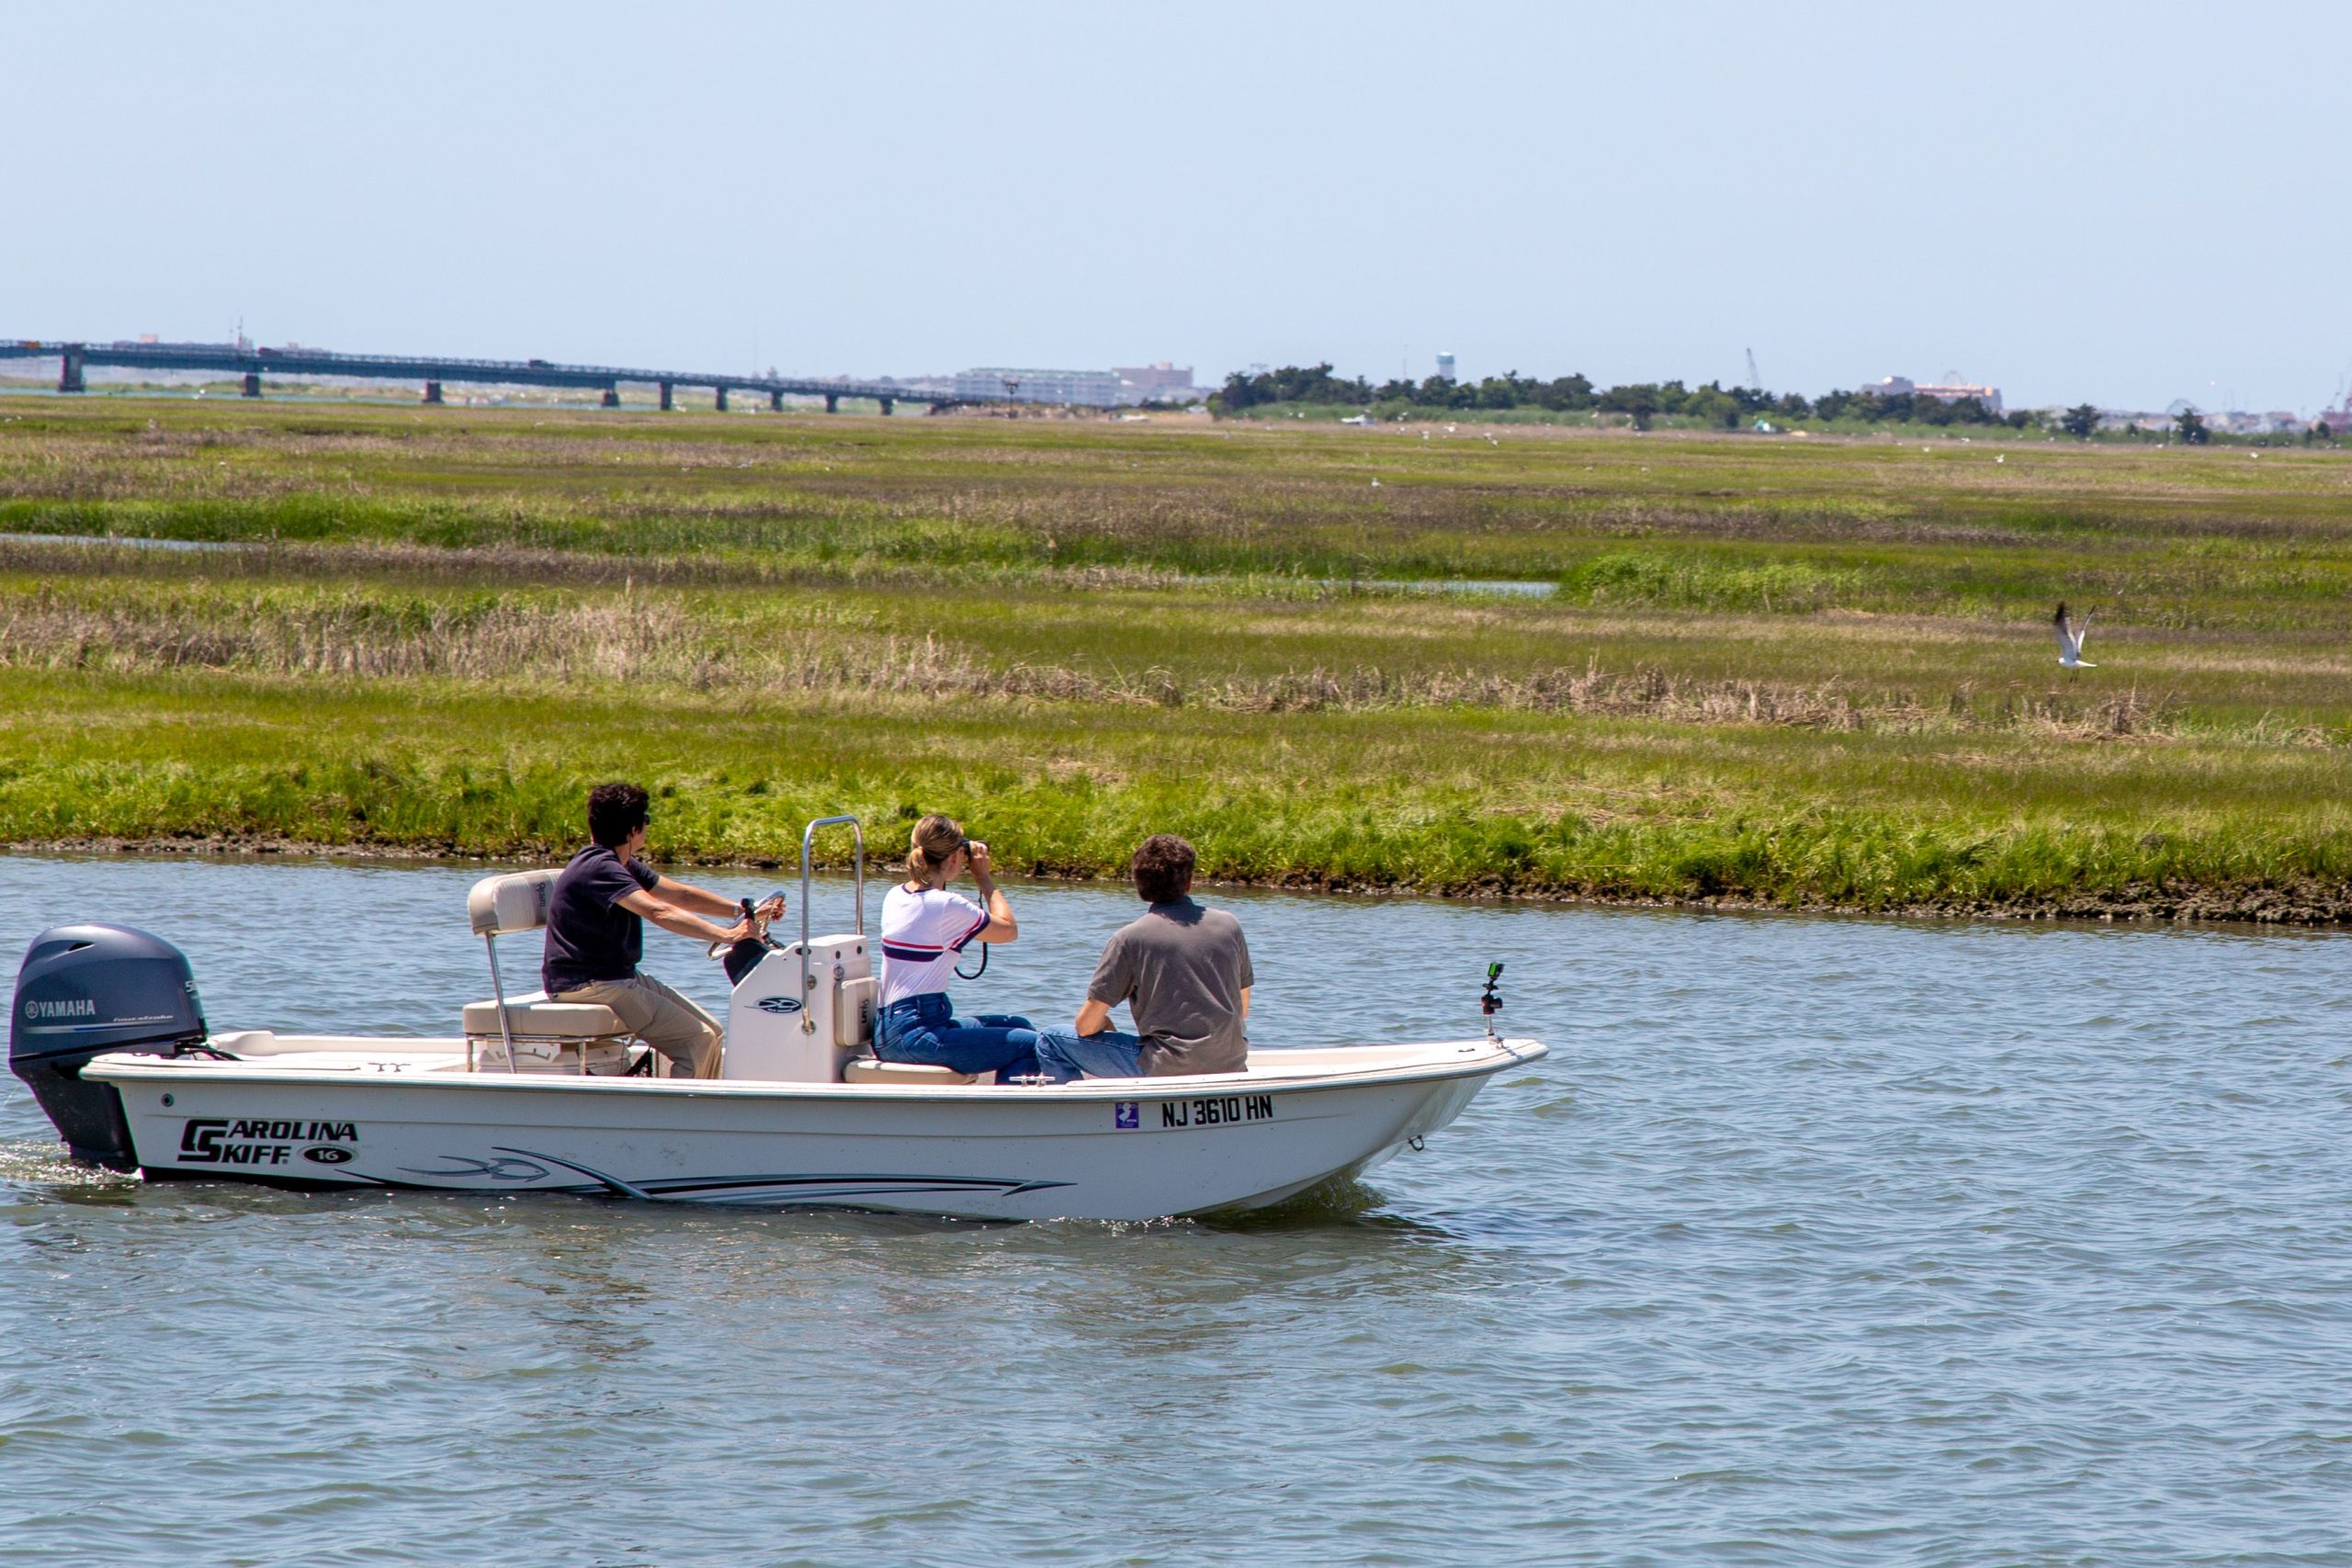 Samantha visits Salt Marshes at the Wetland Institute at the Jersey Shore | places to go outdoors